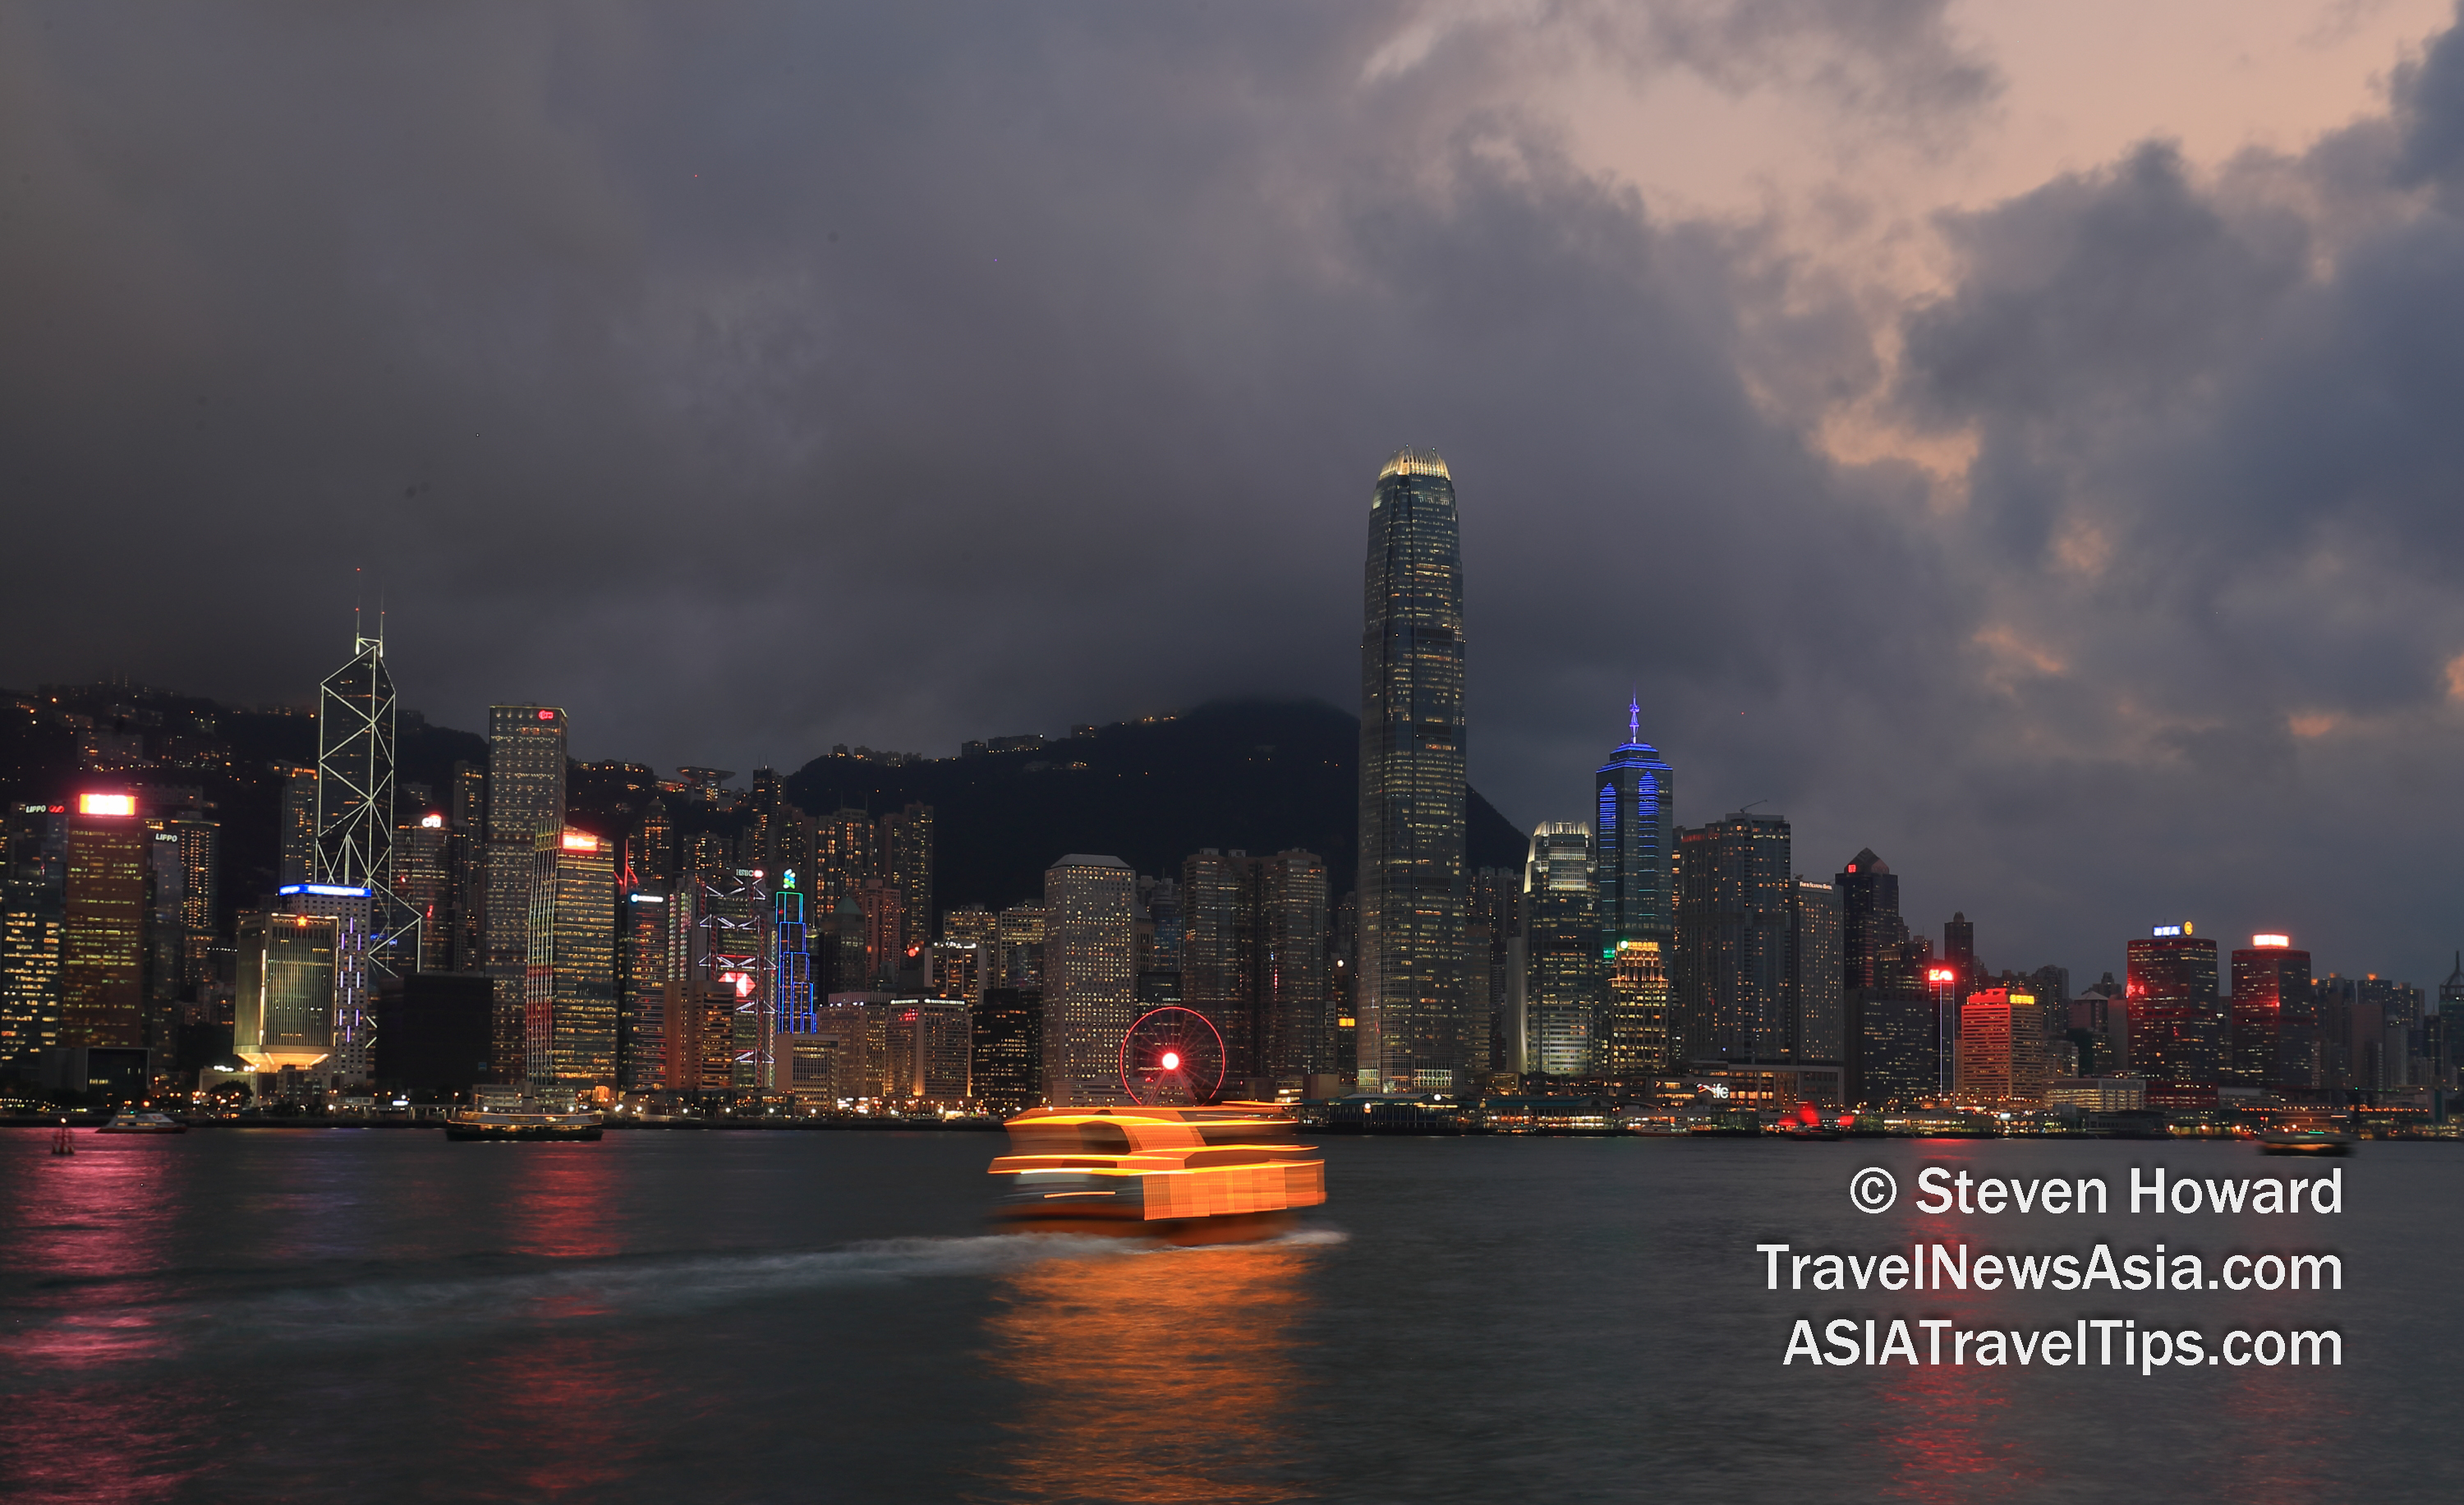 Victoria Harbour and Hong Kong Island as seen from TST waterfront at night. Picture by Steven Howard of TravelNewsAsia.com Click to enlarge.